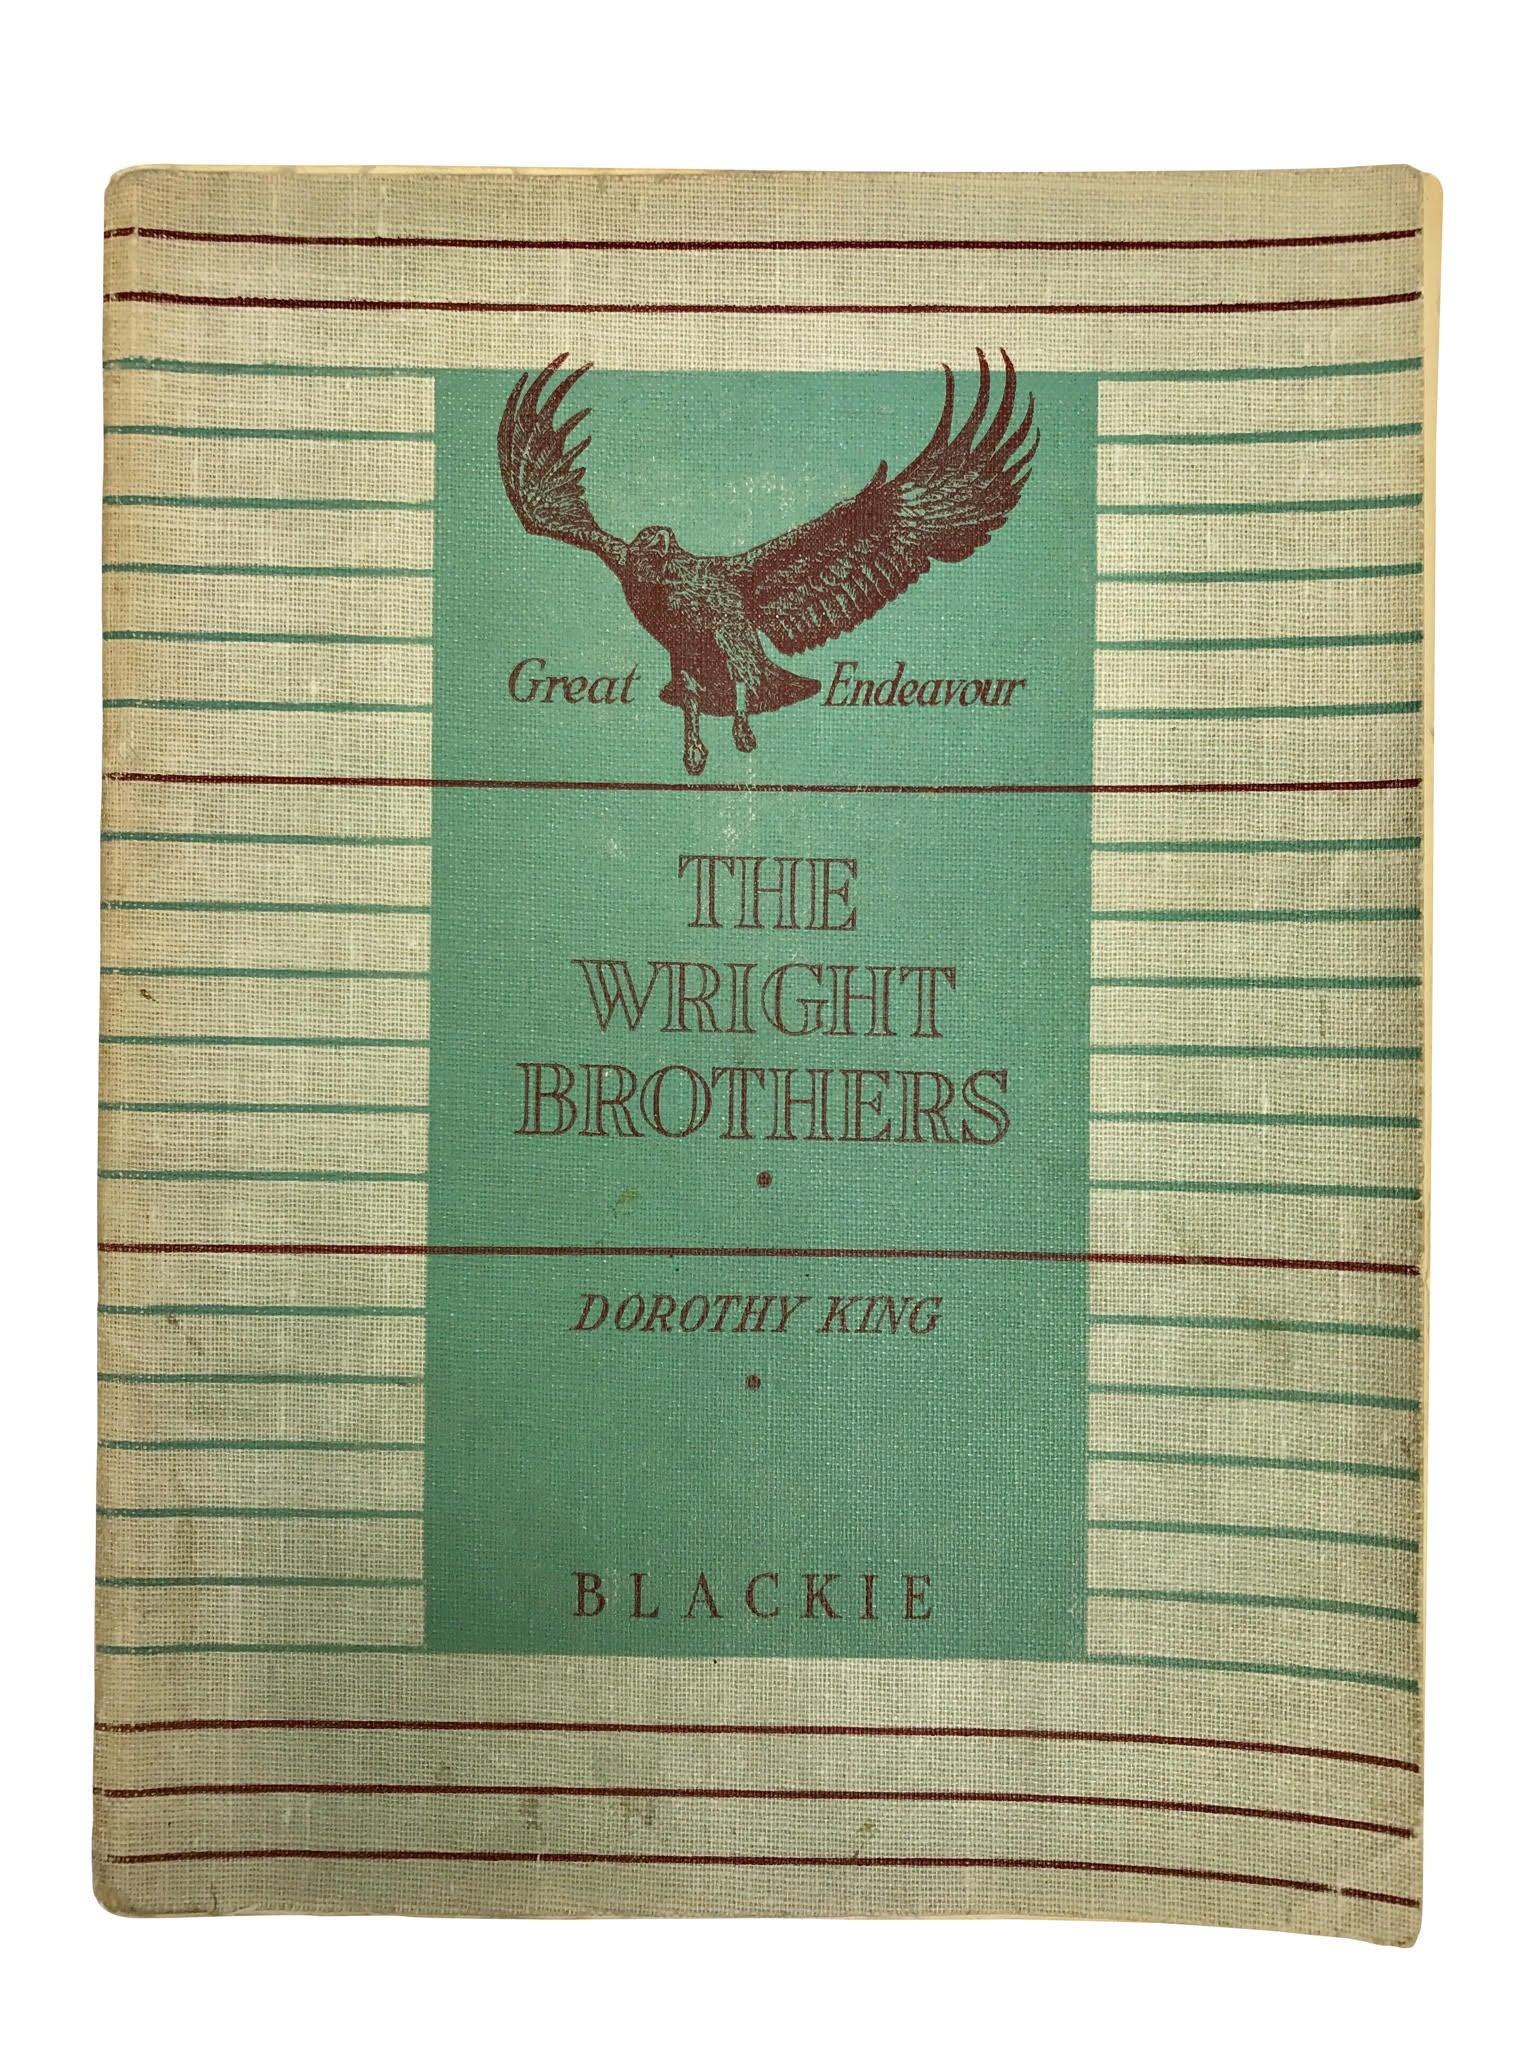 Orville Wright Signed: "The Wright Brothers"